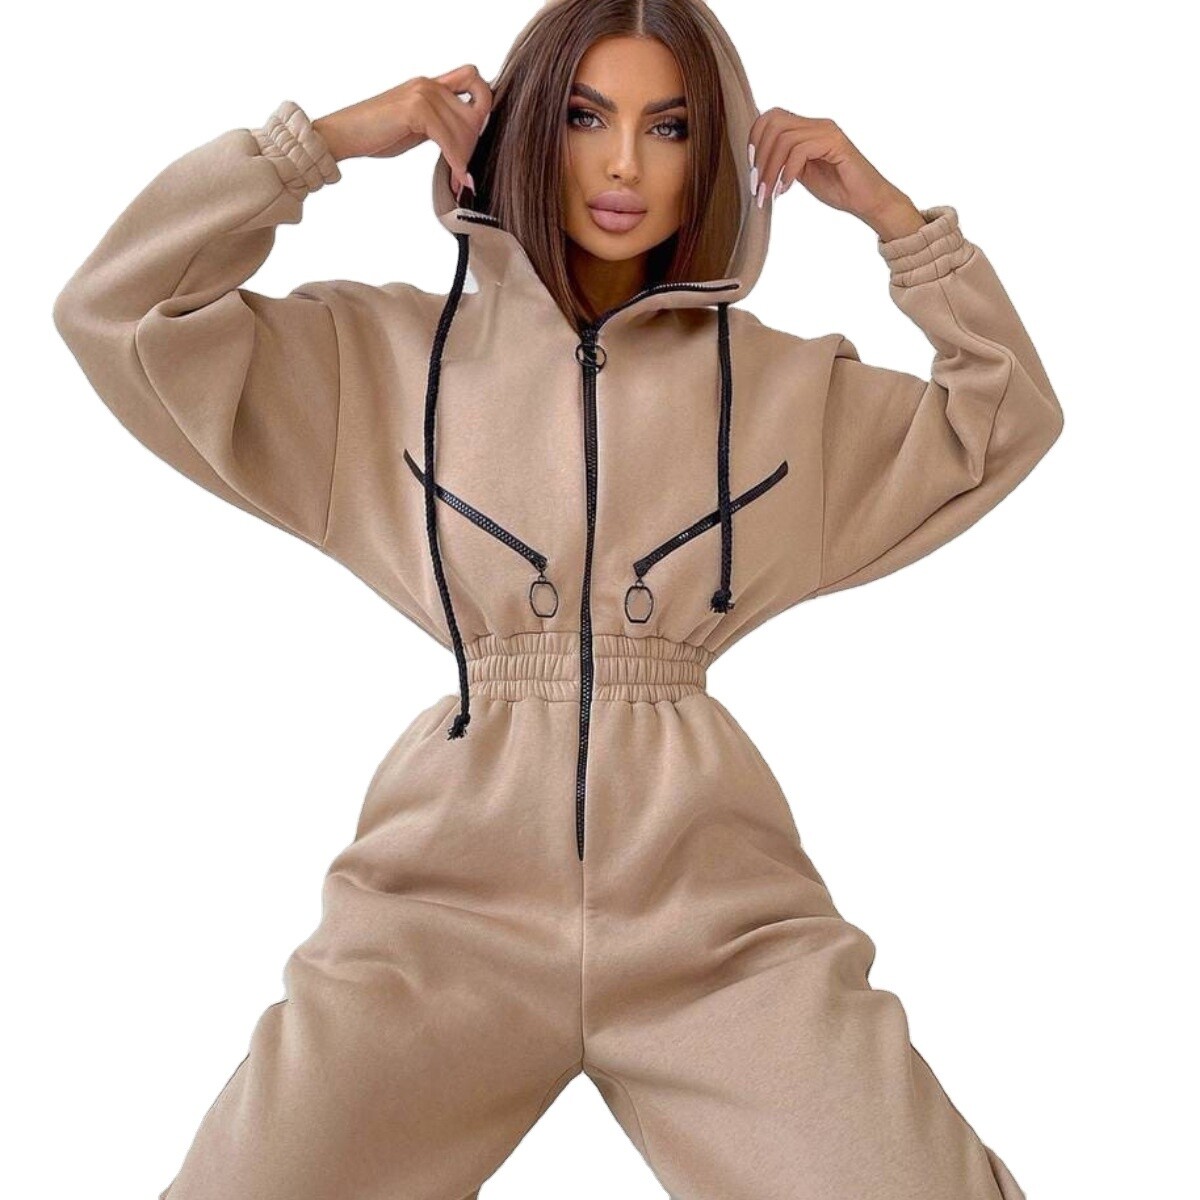 High-quality designer solid-color logo sports casual hoodie jumpsuit women zip